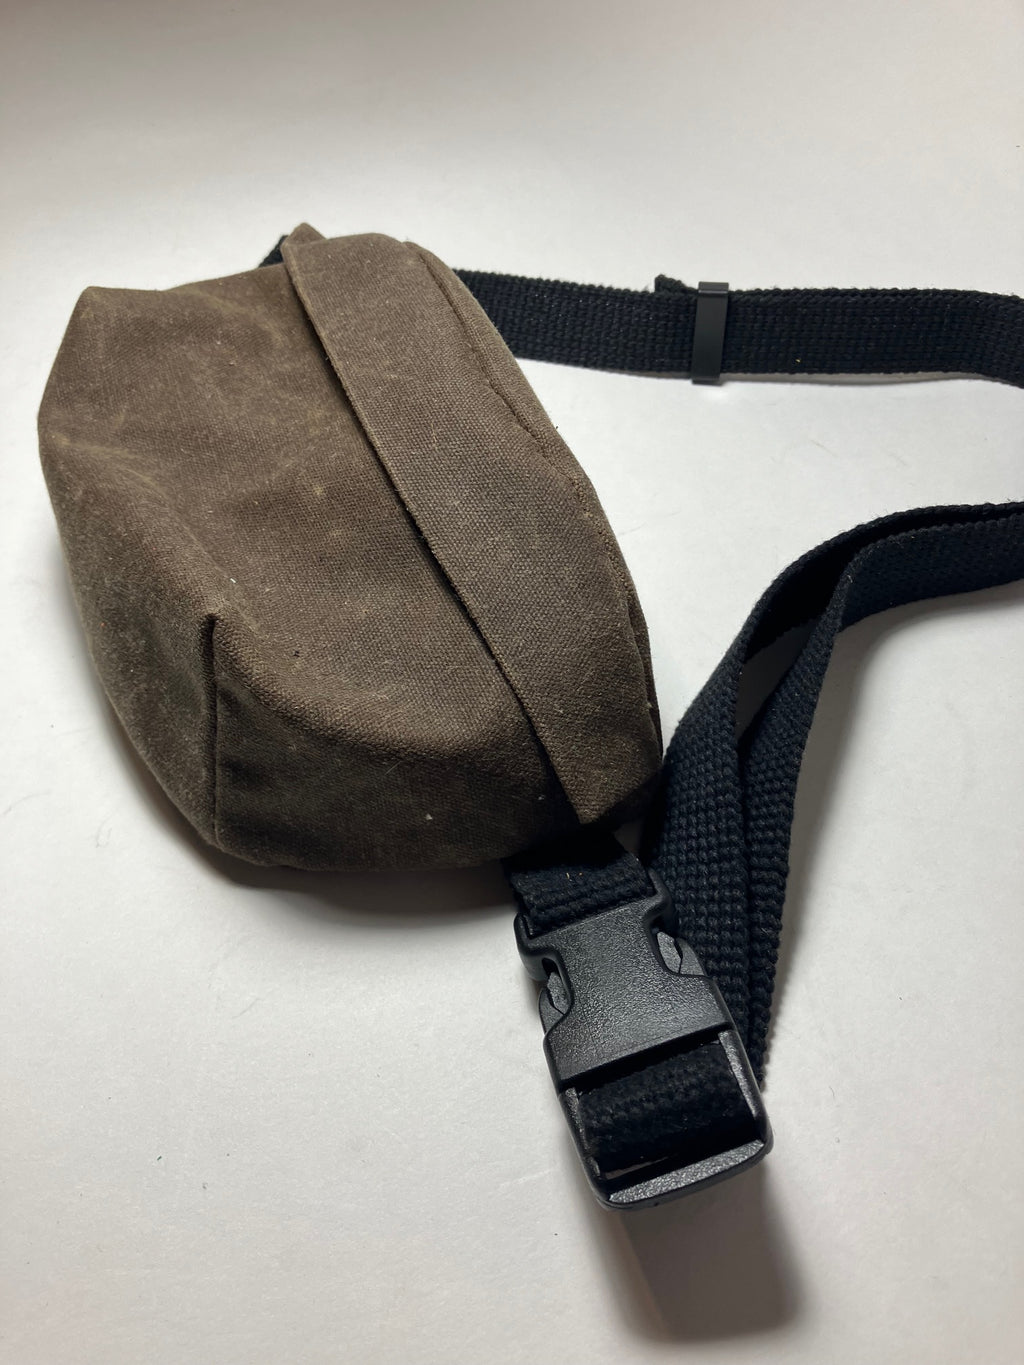 SAMPLE chocolate brown Fanny pack, waist bag, WAXED CANVAS FANNY PACK